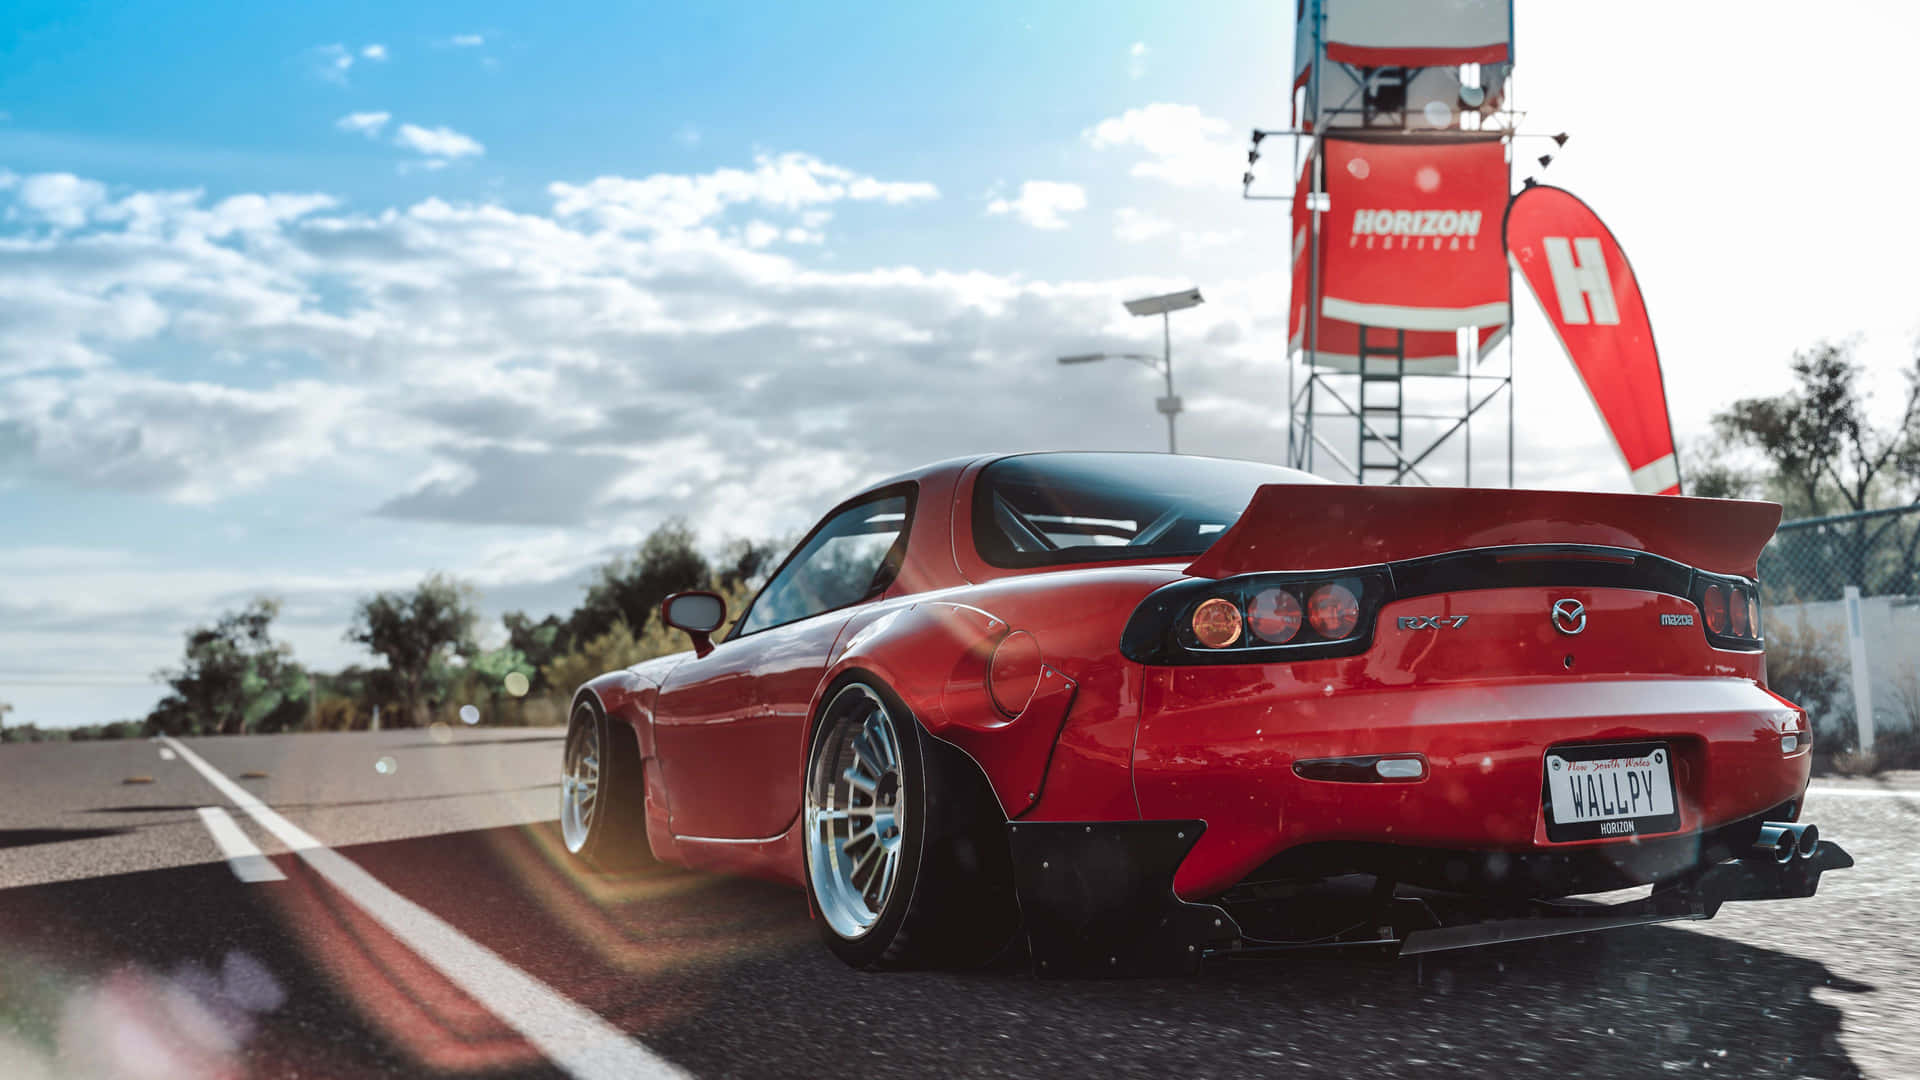 "High-speed Red Mazda RX-7 Making a Curve on a Racetrack" Wallpaper